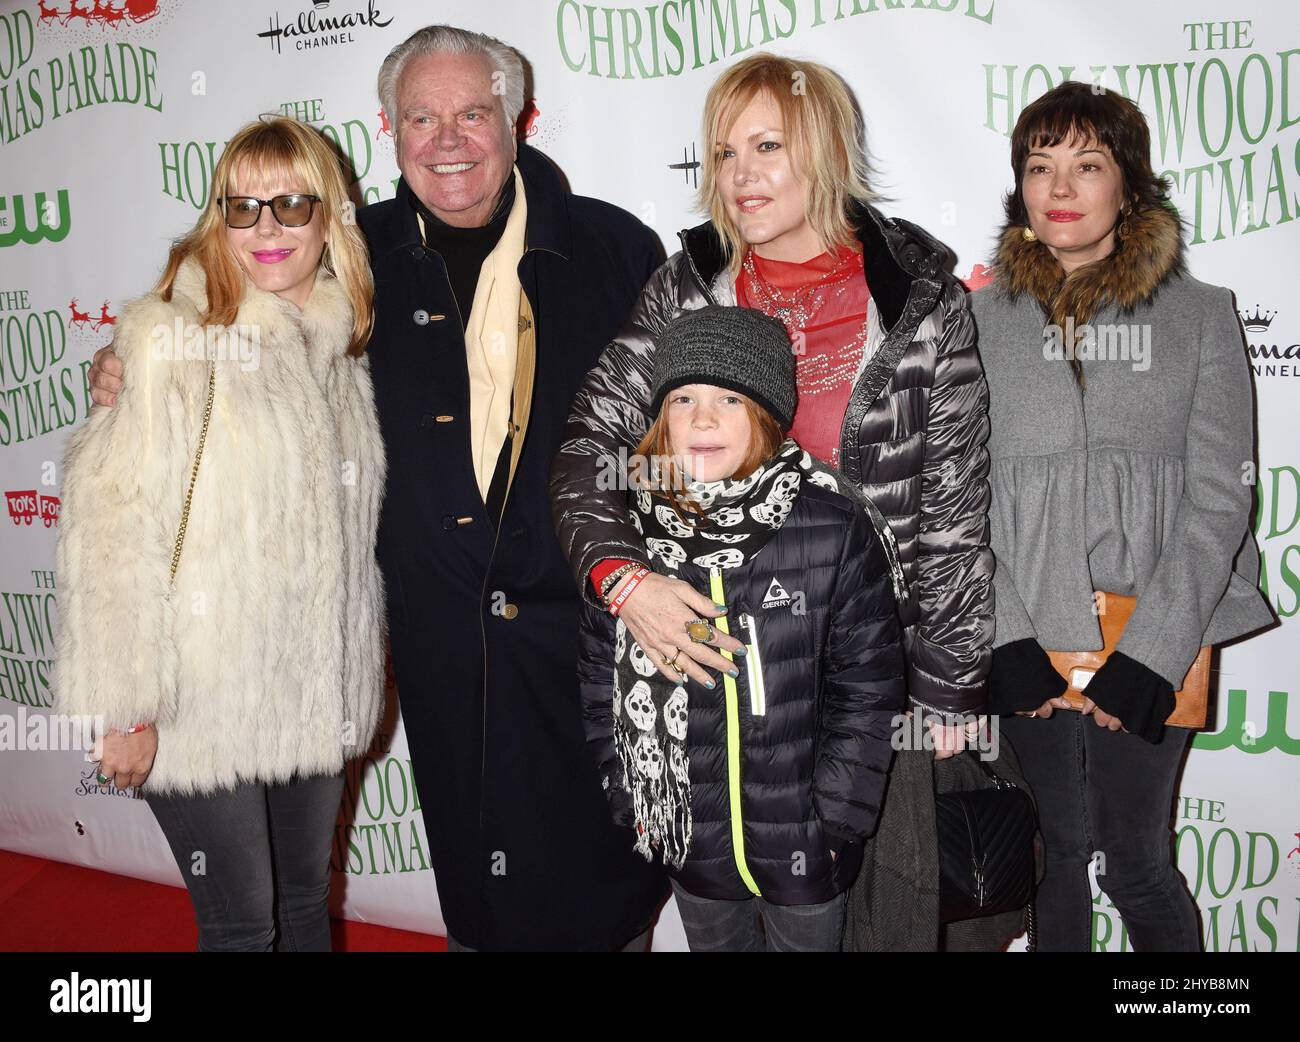 Courtney Wagner, Robert Wagner, Katie Wagner, Riley Lewis and Natasha Wagner attends the 85th Annual Hollywood Christmas Parade held on Hollywood Blvd. Stock Photo